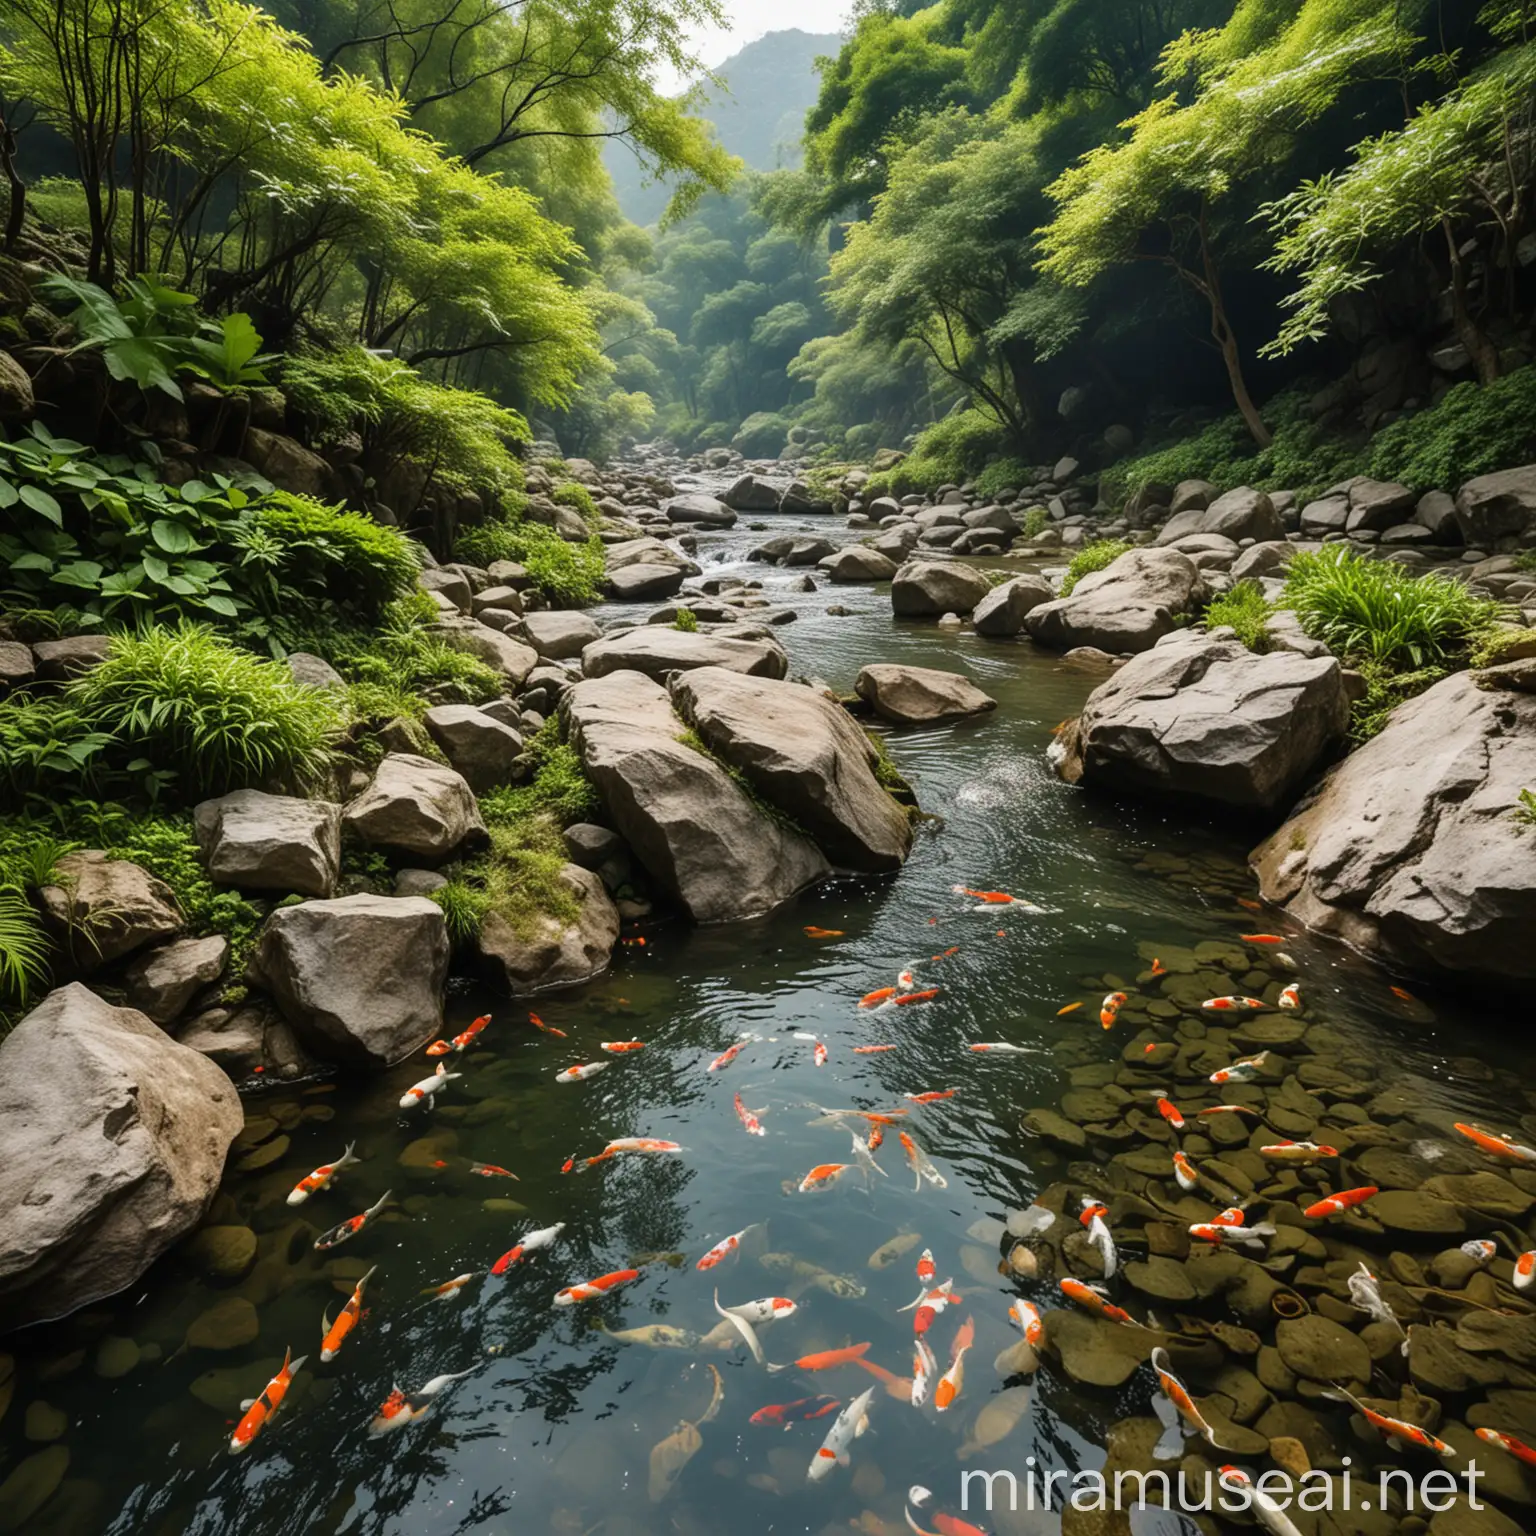 beautiful view of the green valley, in the front there is a black rock near a river flowing with clear water full of KOI fish